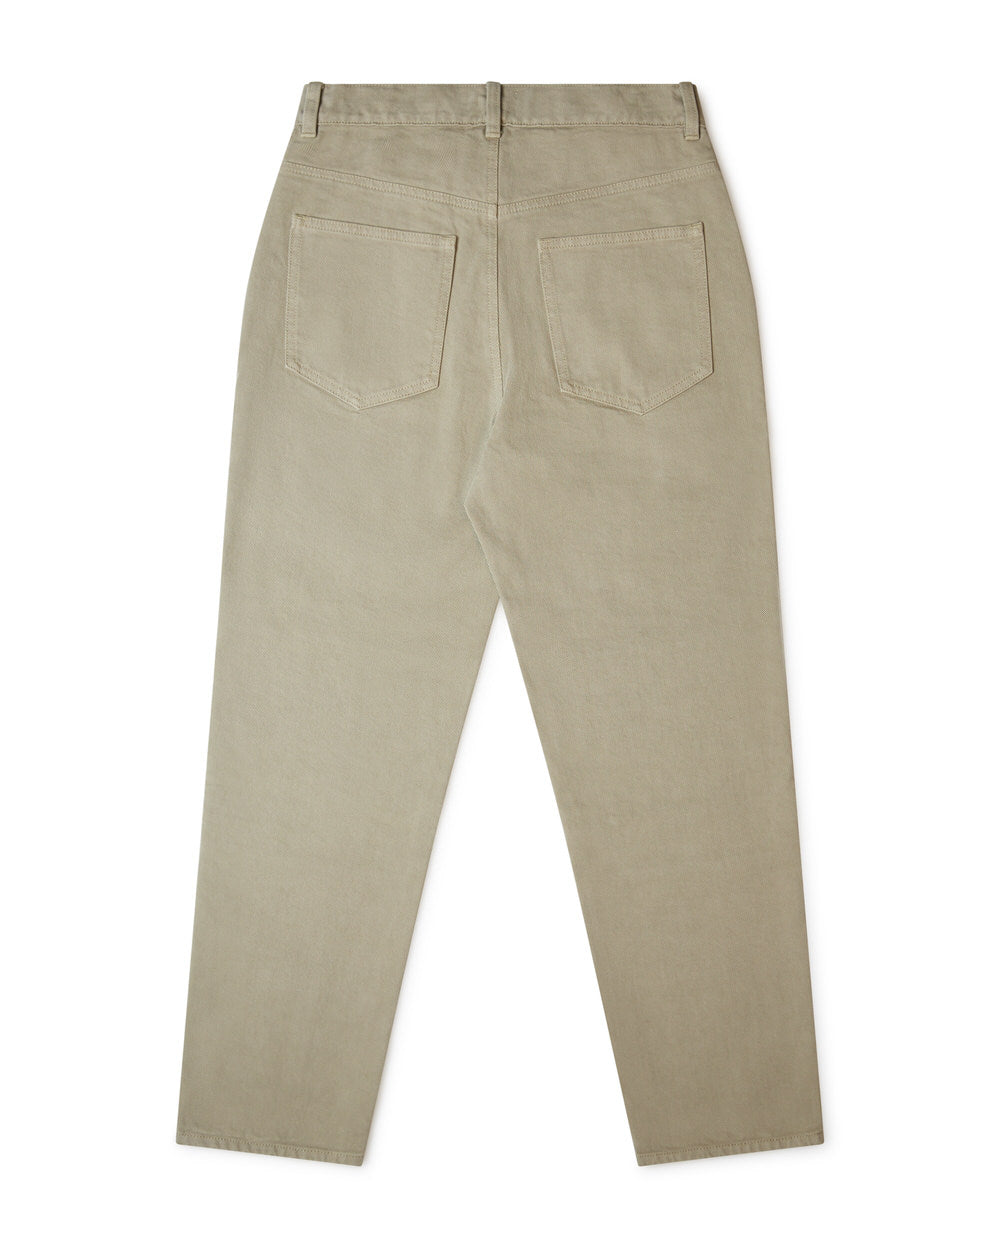 Beige, straight trousers wild sage made from organic cotton by Matona